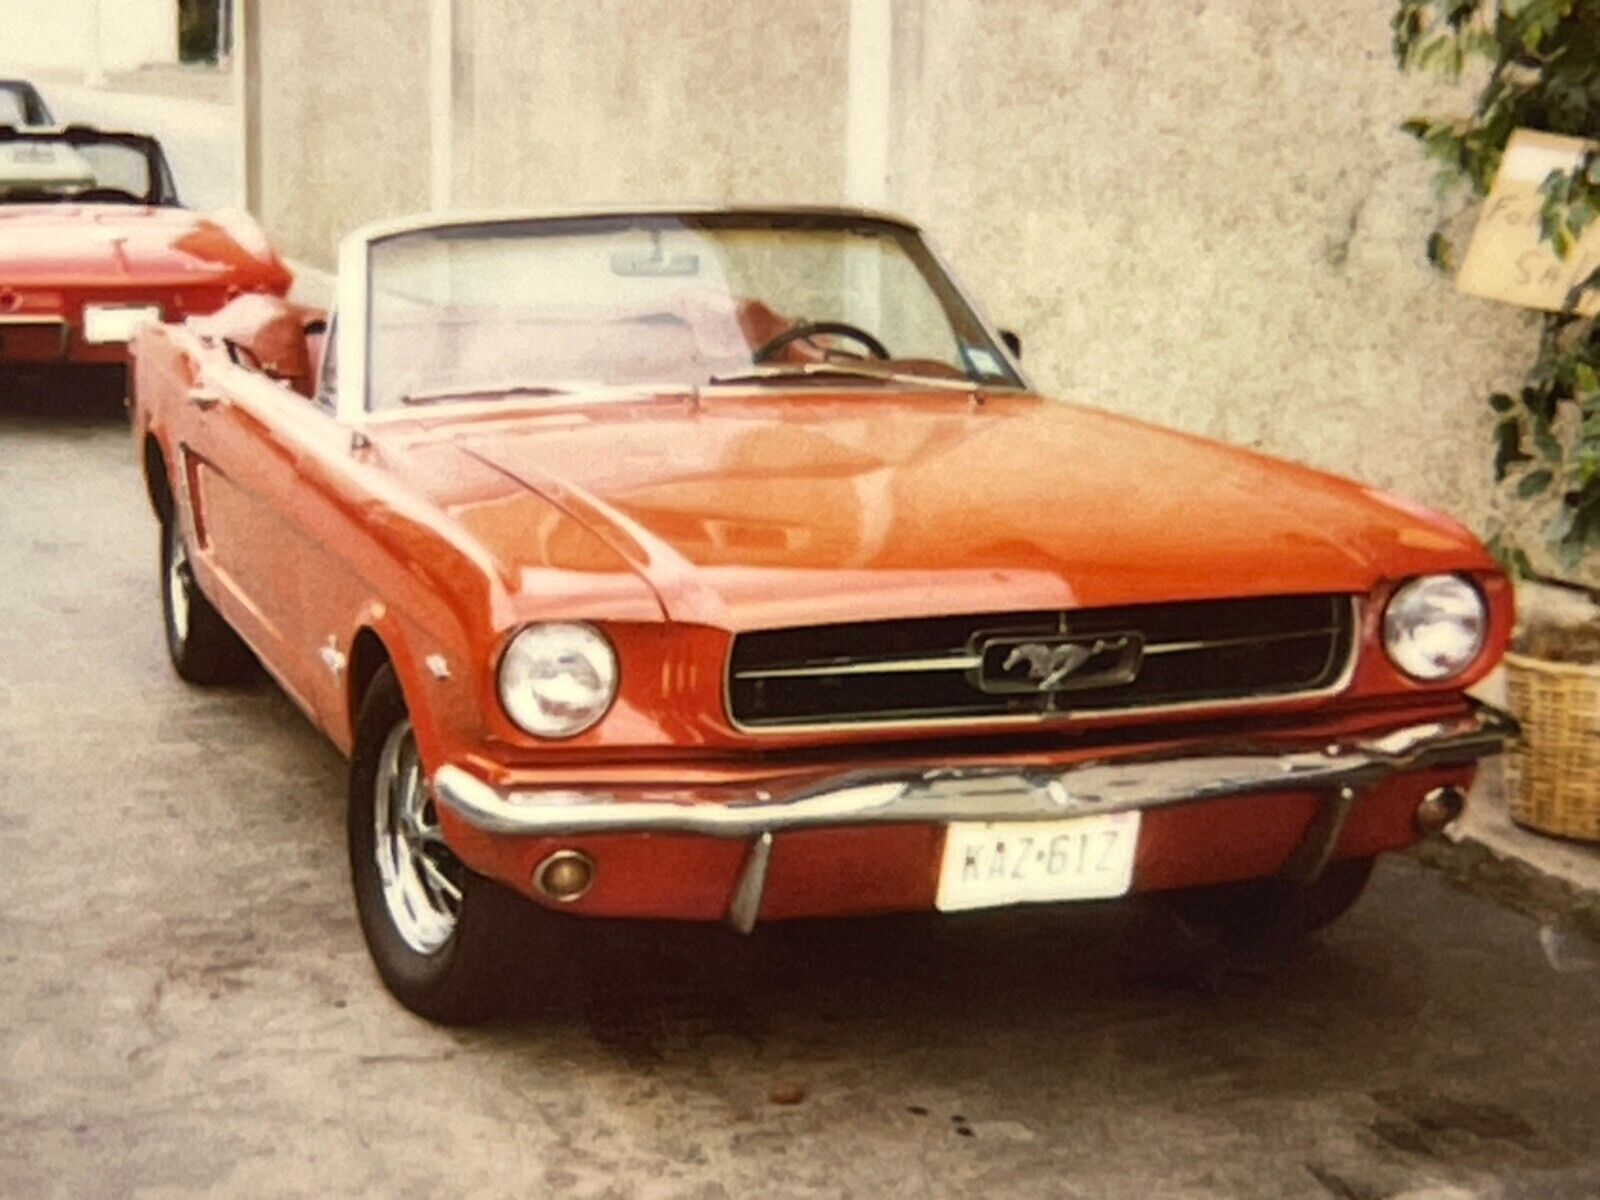 CCJ 2 Photographs From 1980-90's Polaroid Artistic Of A 1964 1/2 Ford Mustang